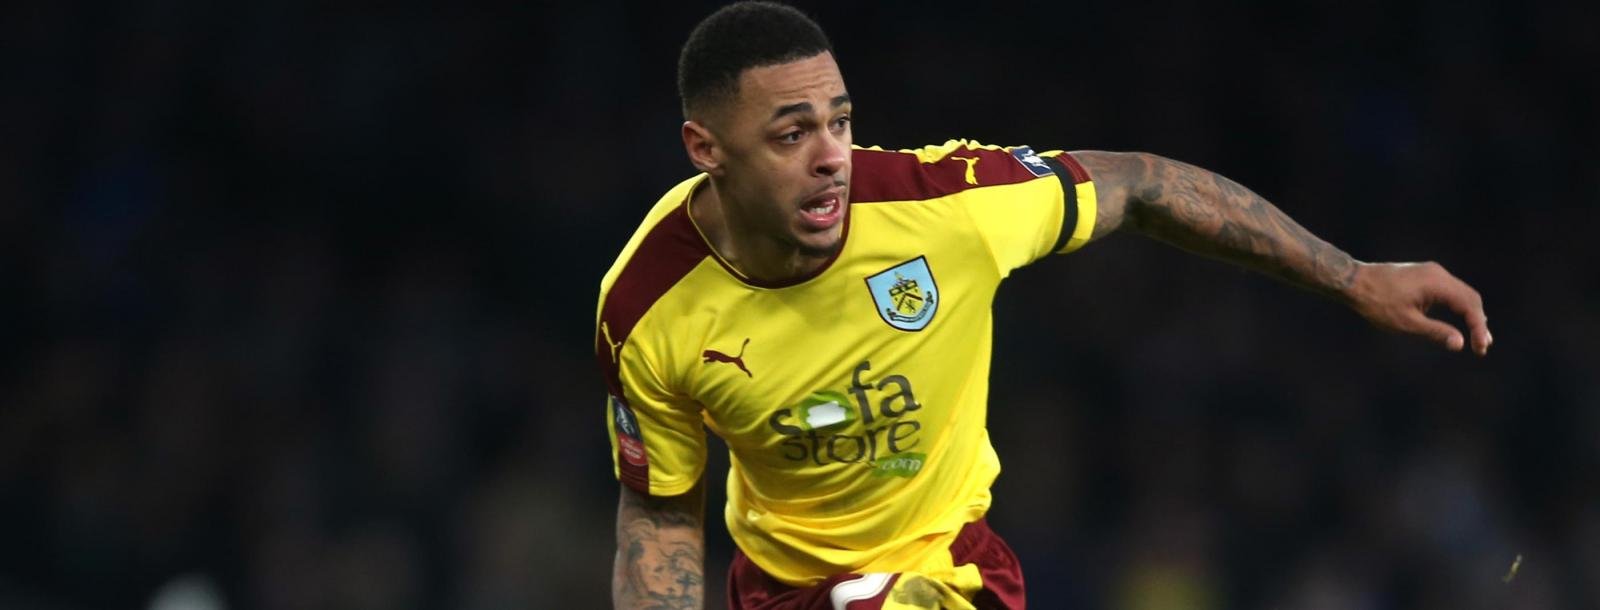 Gray can’t afford to dwell on Burnley penalty miss